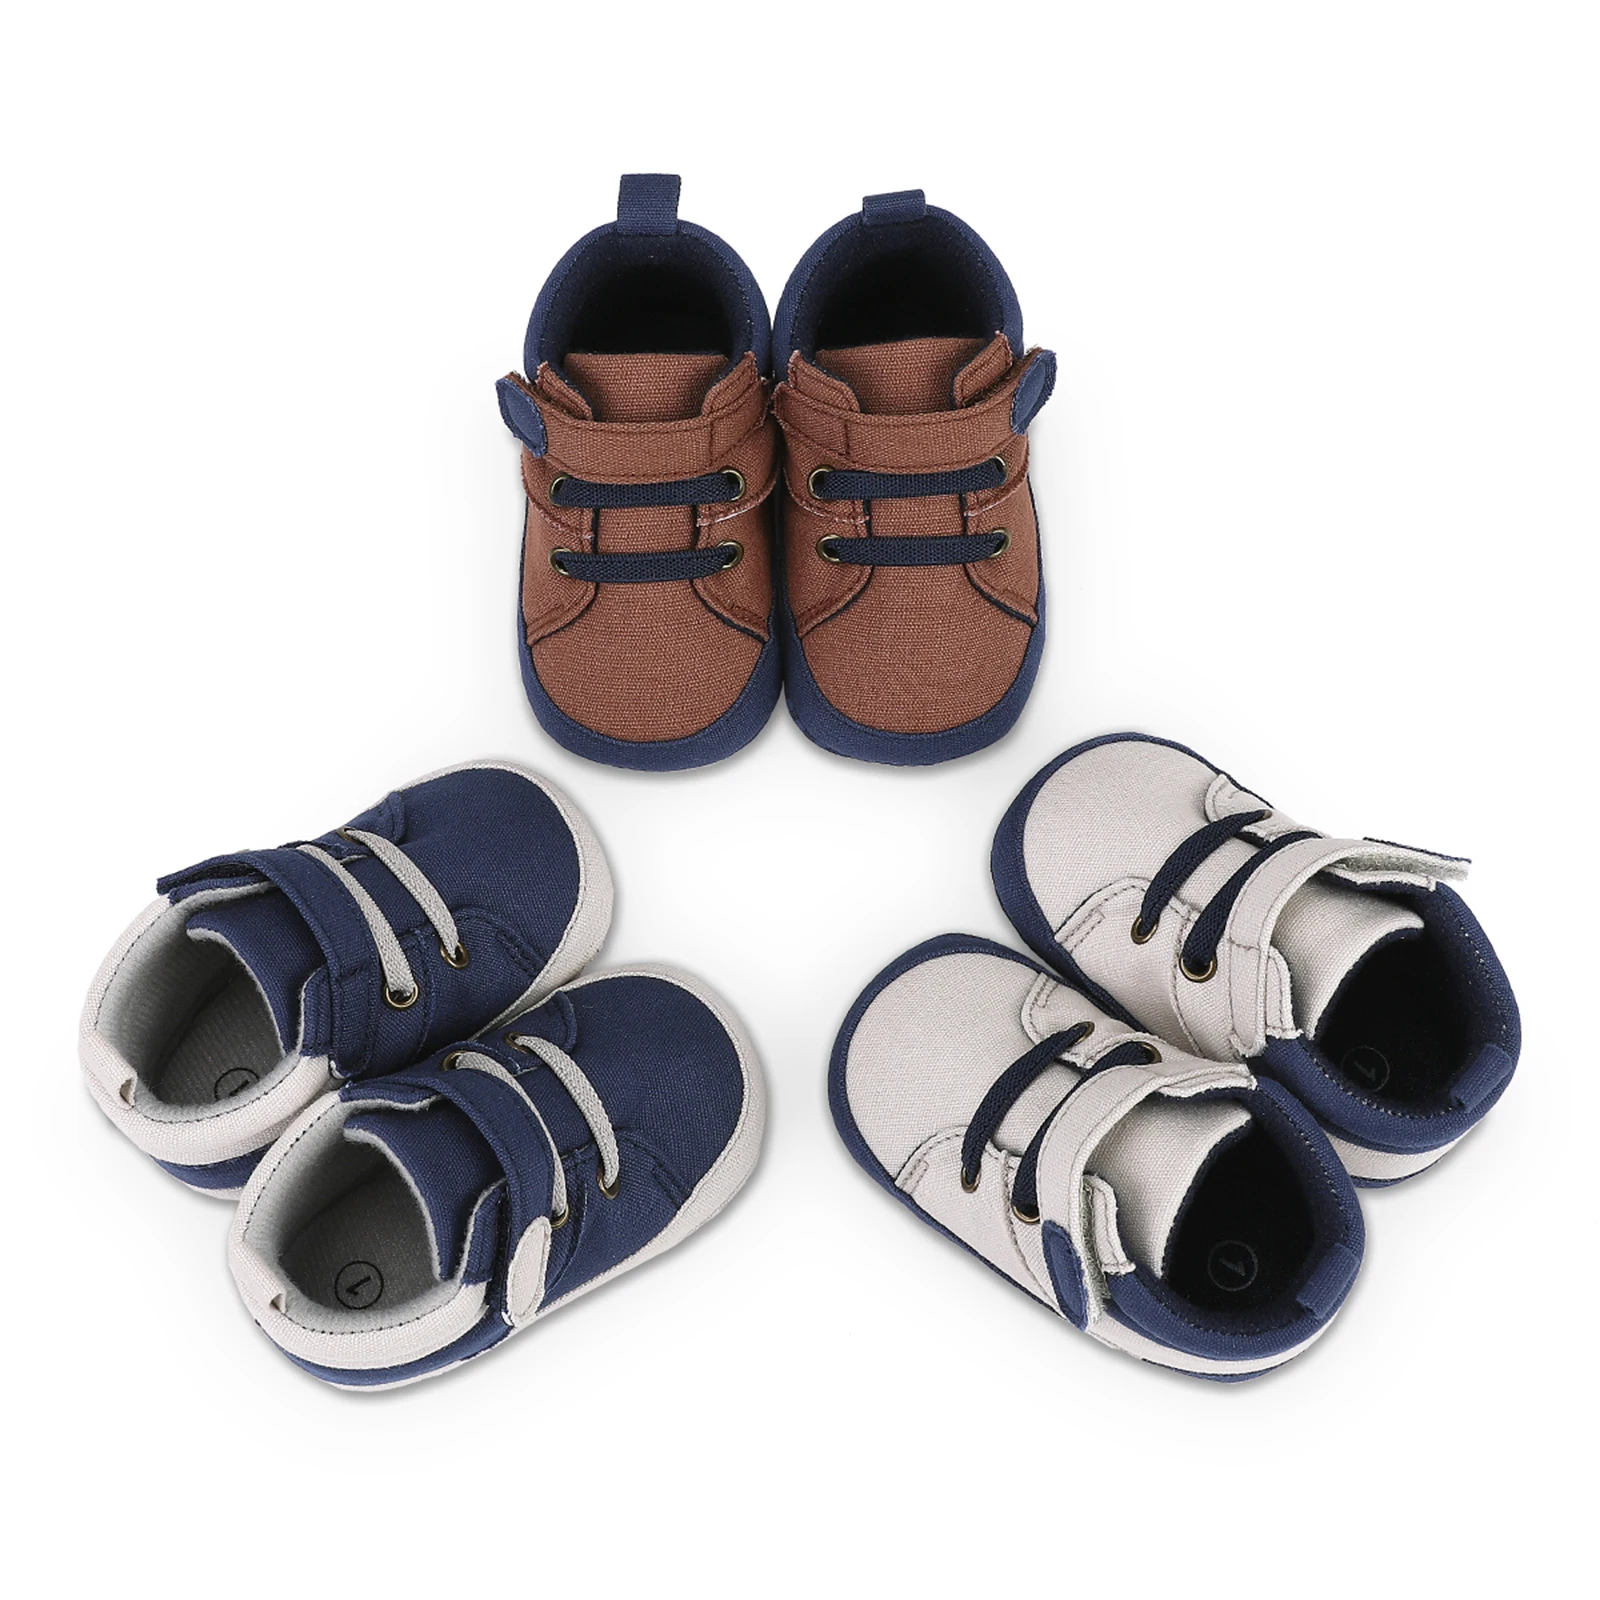 

BeQeuewll Baby Shoes Boy Newborn Infant Toddler Casual Comfor Cotton Sole Anti-slip First Walkers Crawl Crib Moccasins Shoes